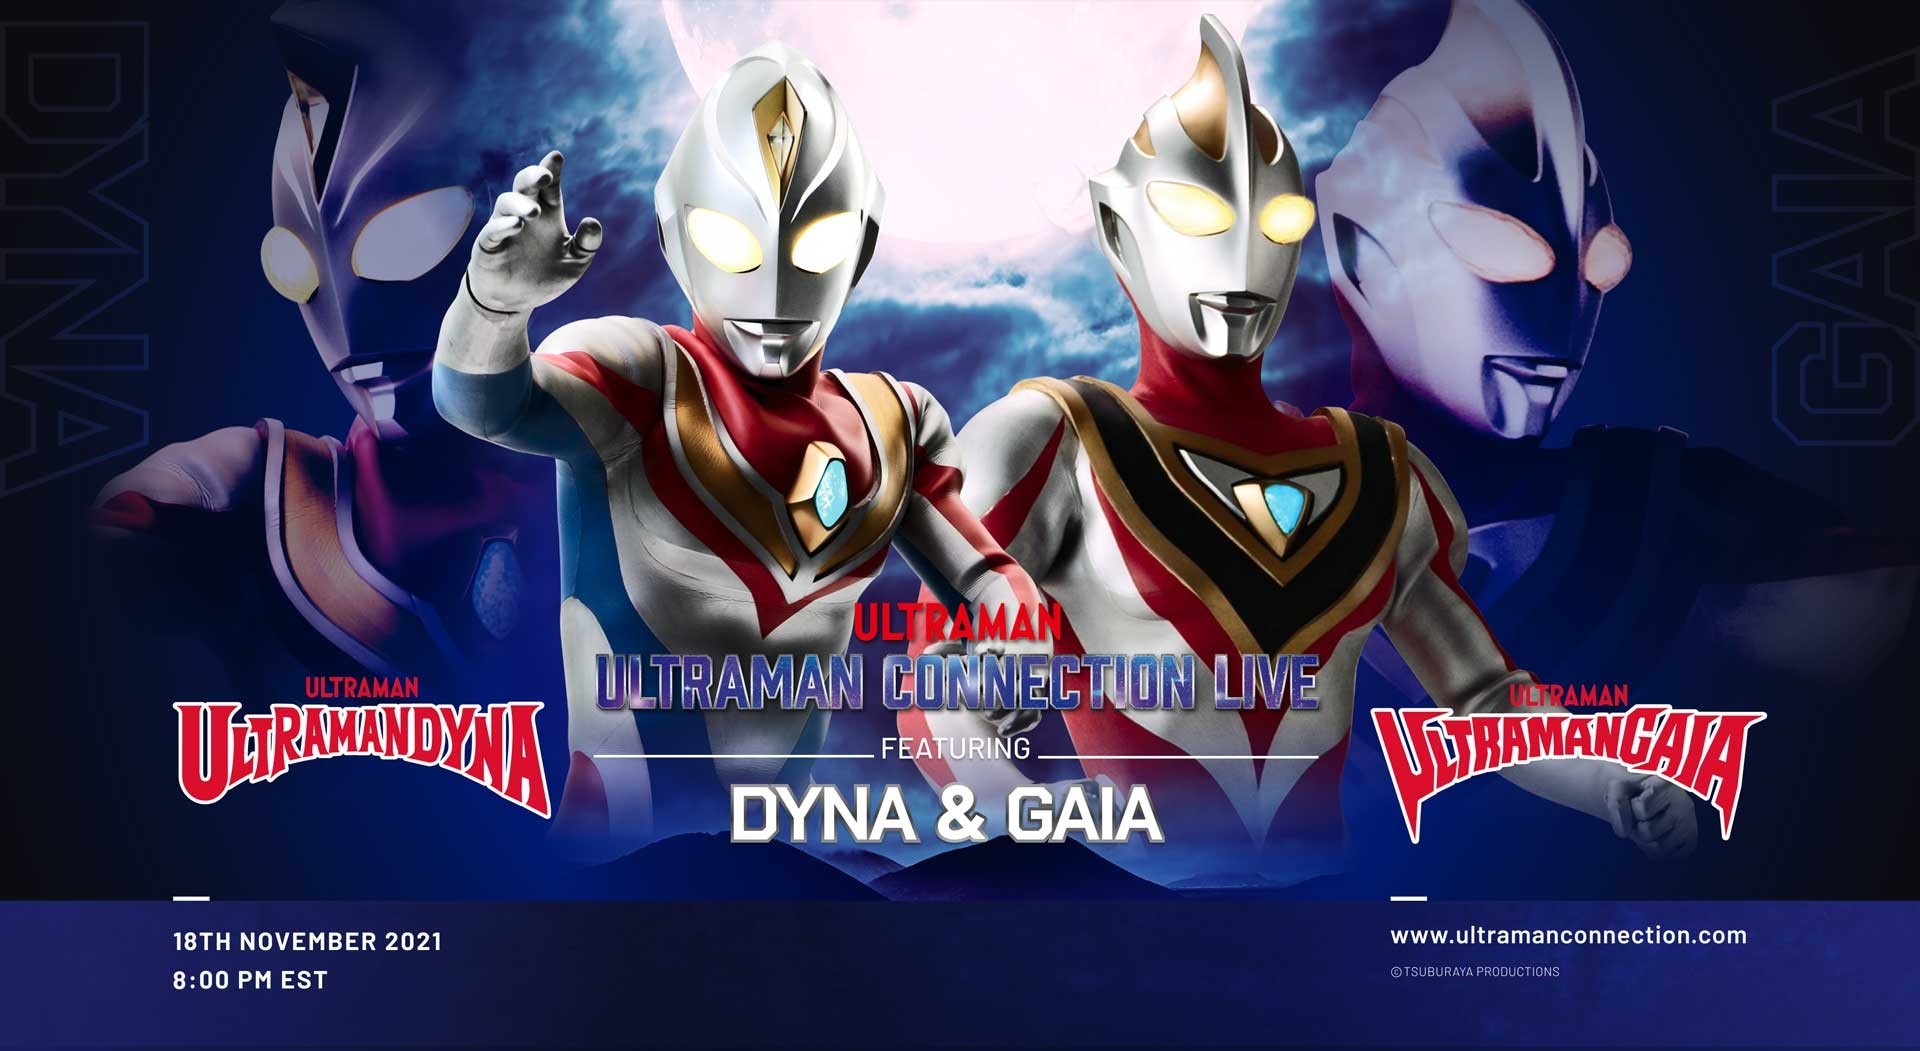 ULTRAMAN CONNECTION LIVE FEATURING DYNA & GAIA REVIVES TWO OF TSUBURAYA’S MOST CELEBRATED ULTRAS